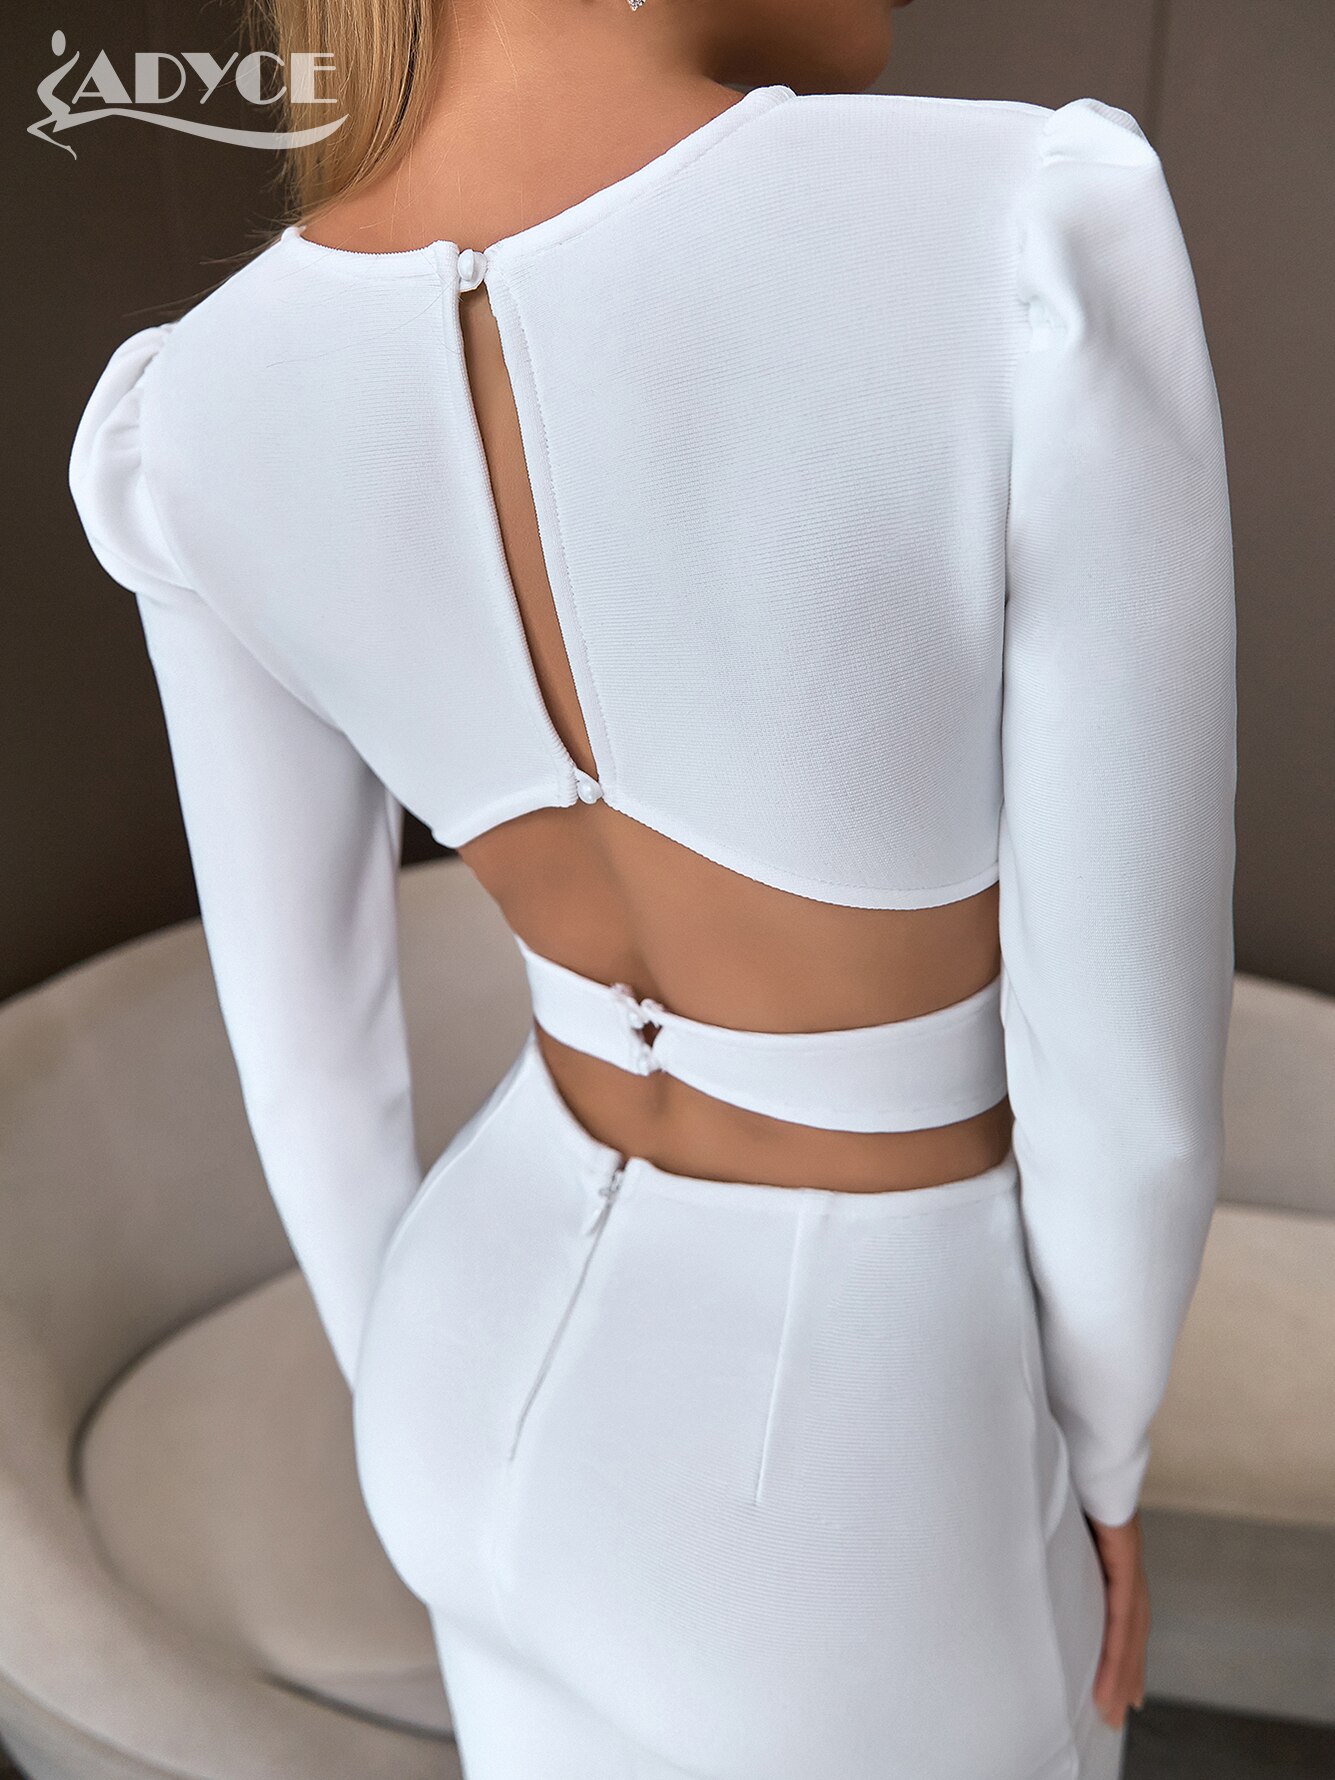 Adyce-2022-Winter-Long-Sleeve-Maxi-Bandage-Dress-For-Women-Sexy-Hollow-Out-Backless-V-Neck-3